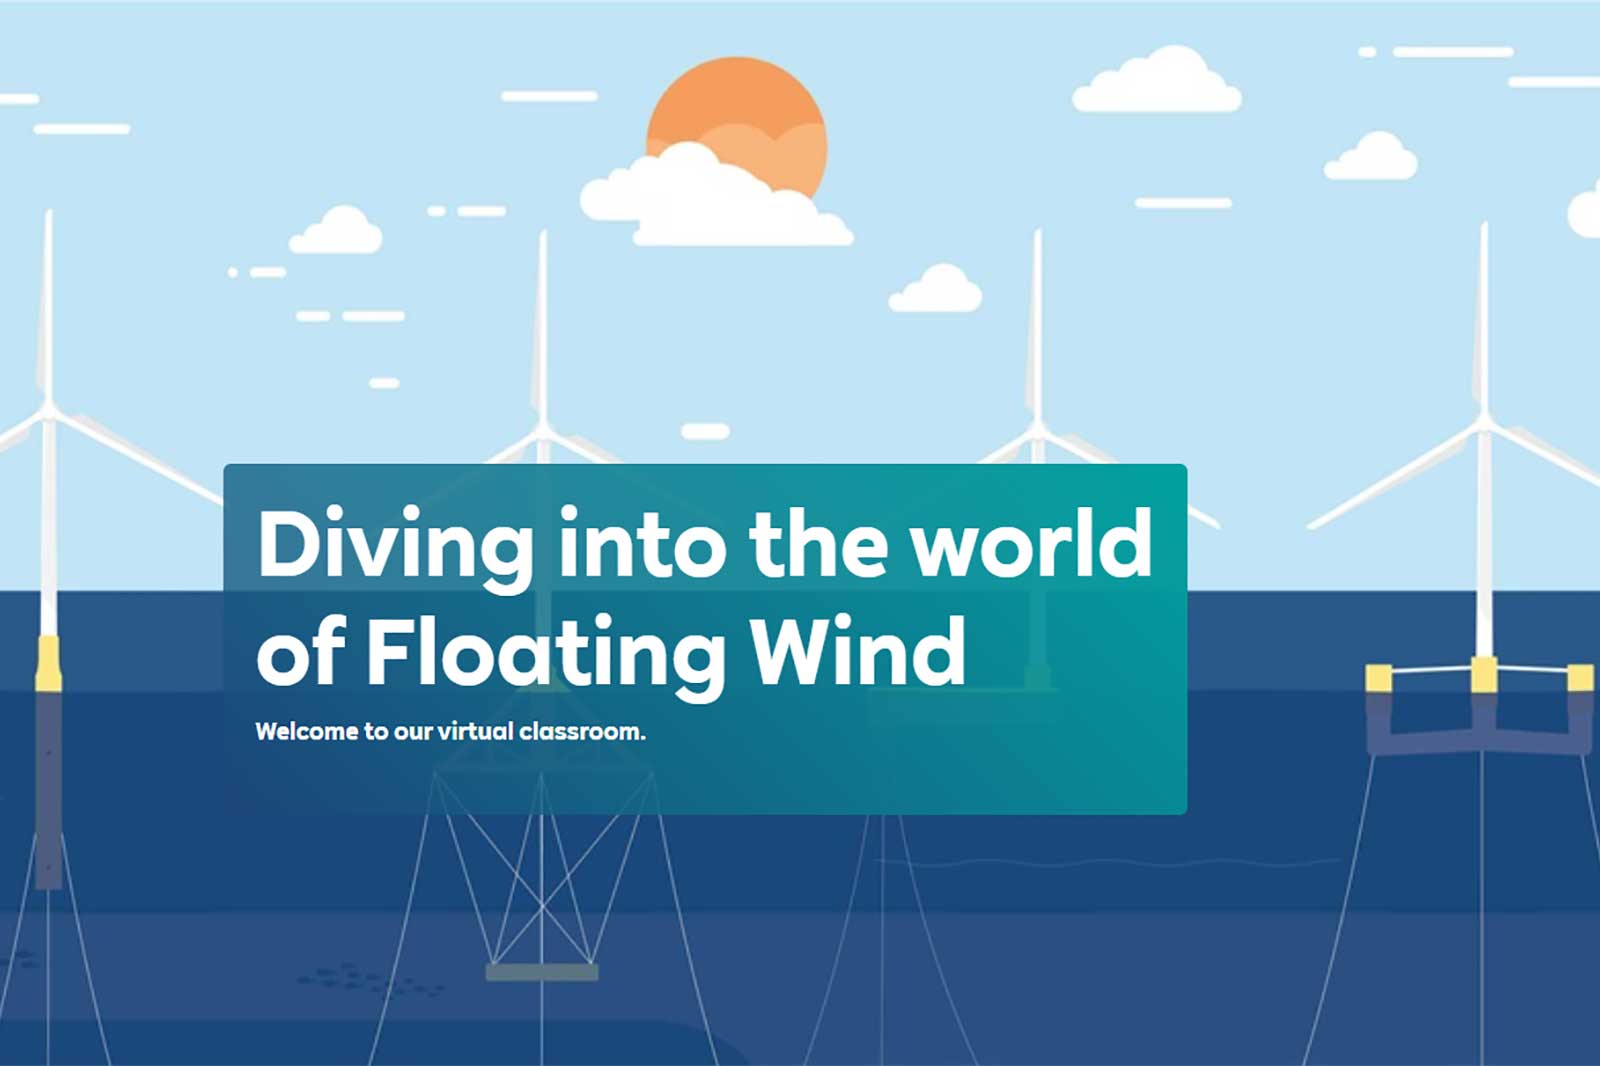 RWE launches floating wind virtual classroom